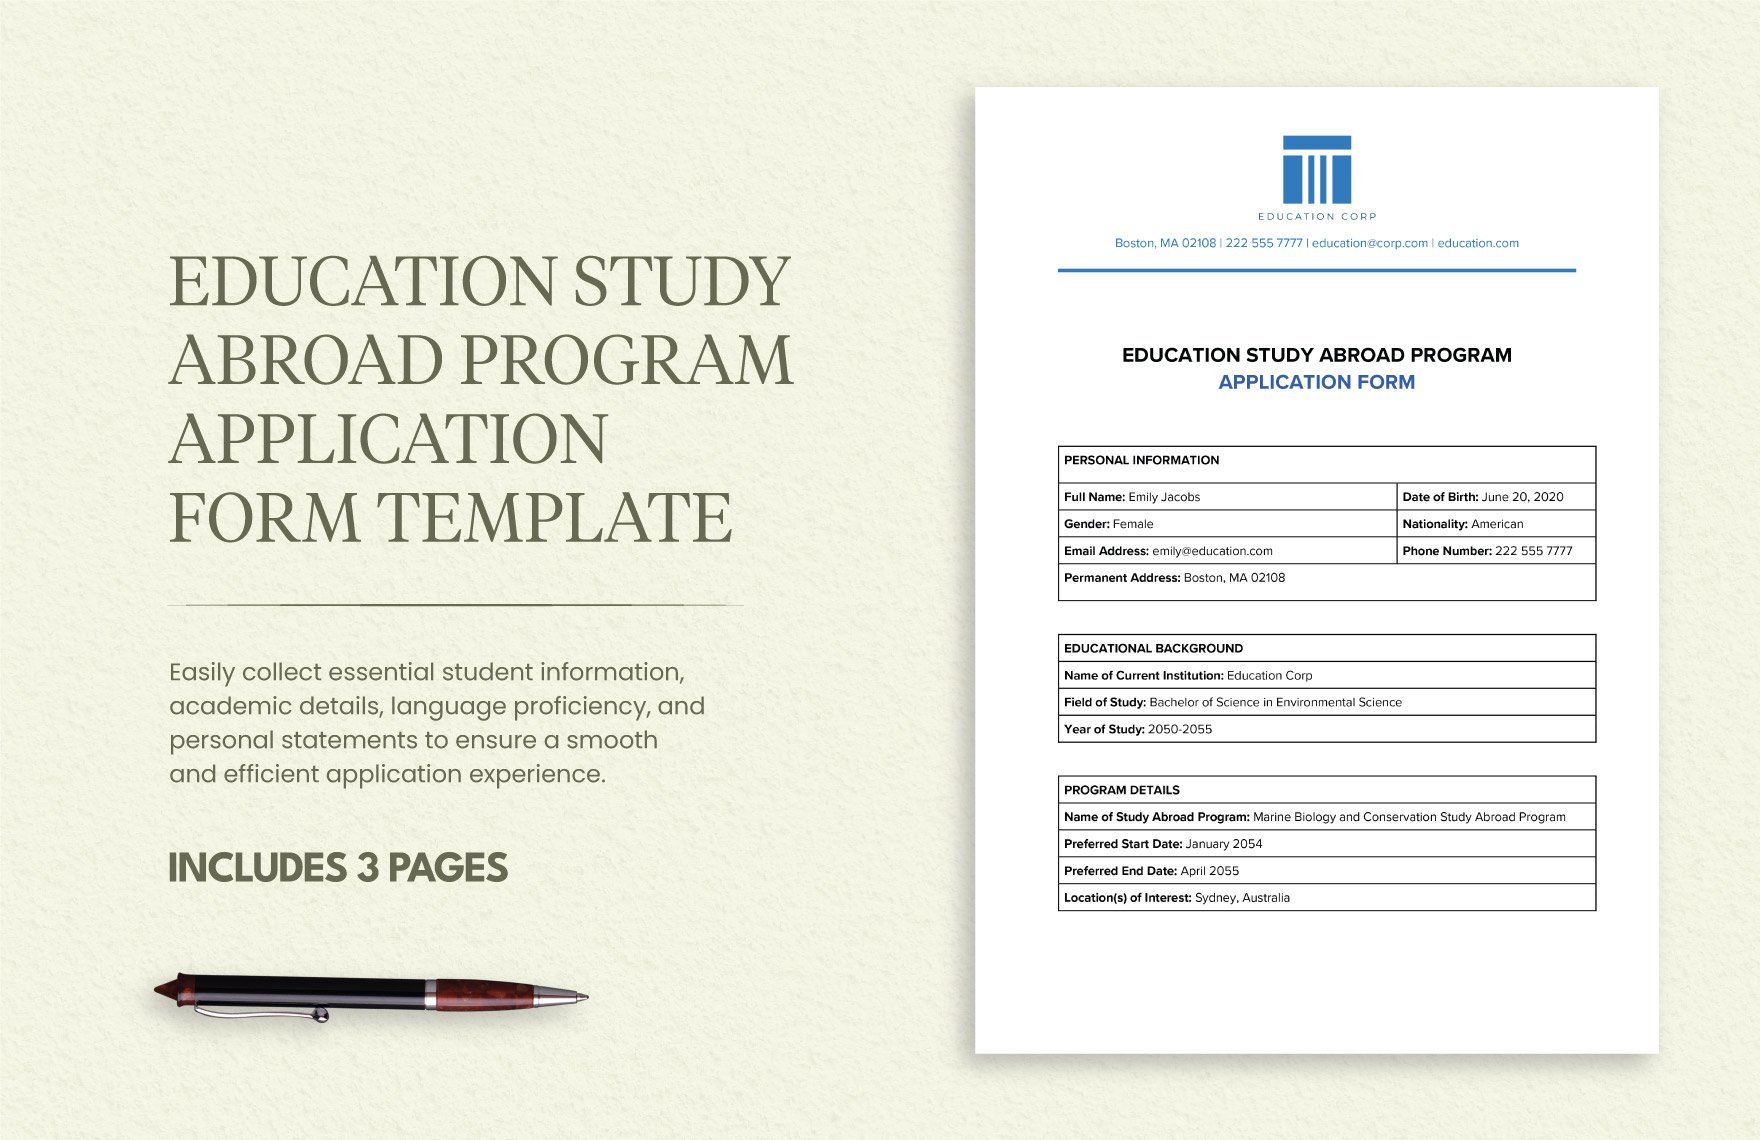 Education Study Abroad Program Application Form Template in Word, Google Docs, PDF